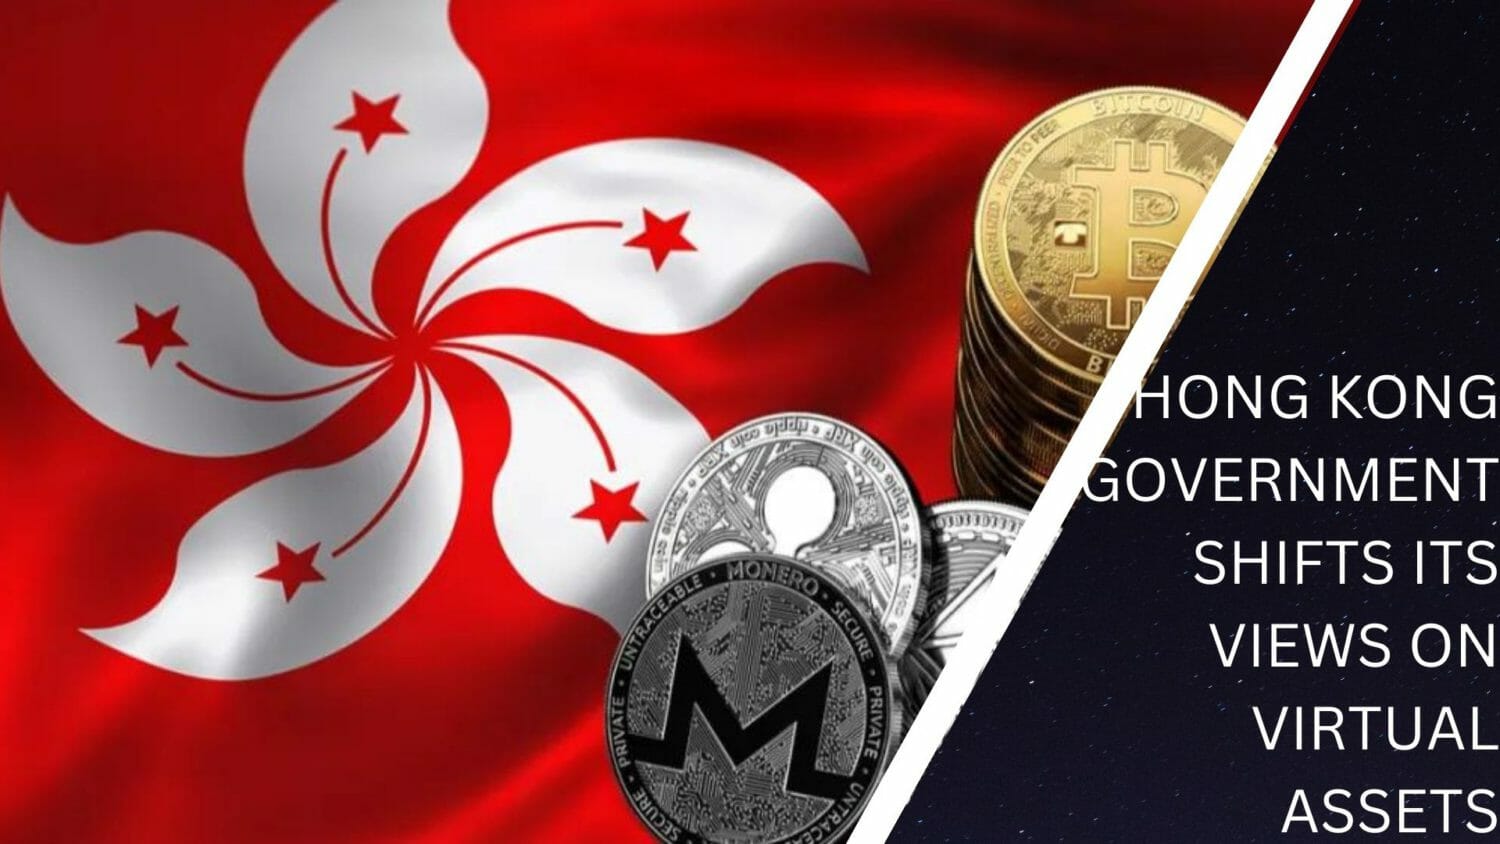 The Government Of Hong Kong Is Planning To Introduce Retail Investors To Trade Cryptocurrencies And Exchange-Traded Funds.